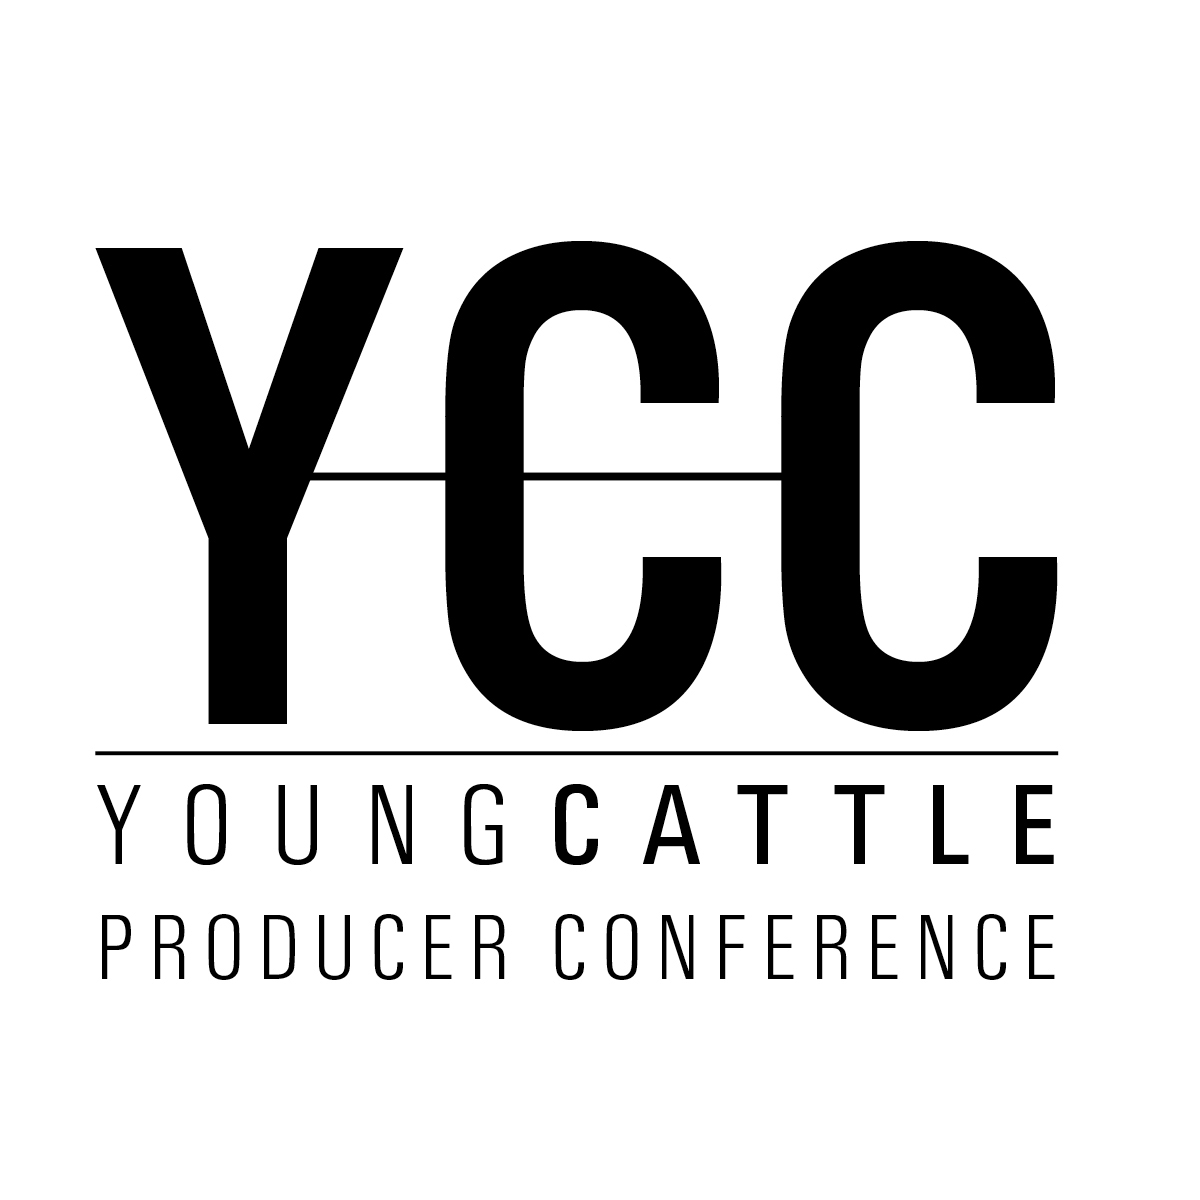 Young Cattle Producer Conference logo